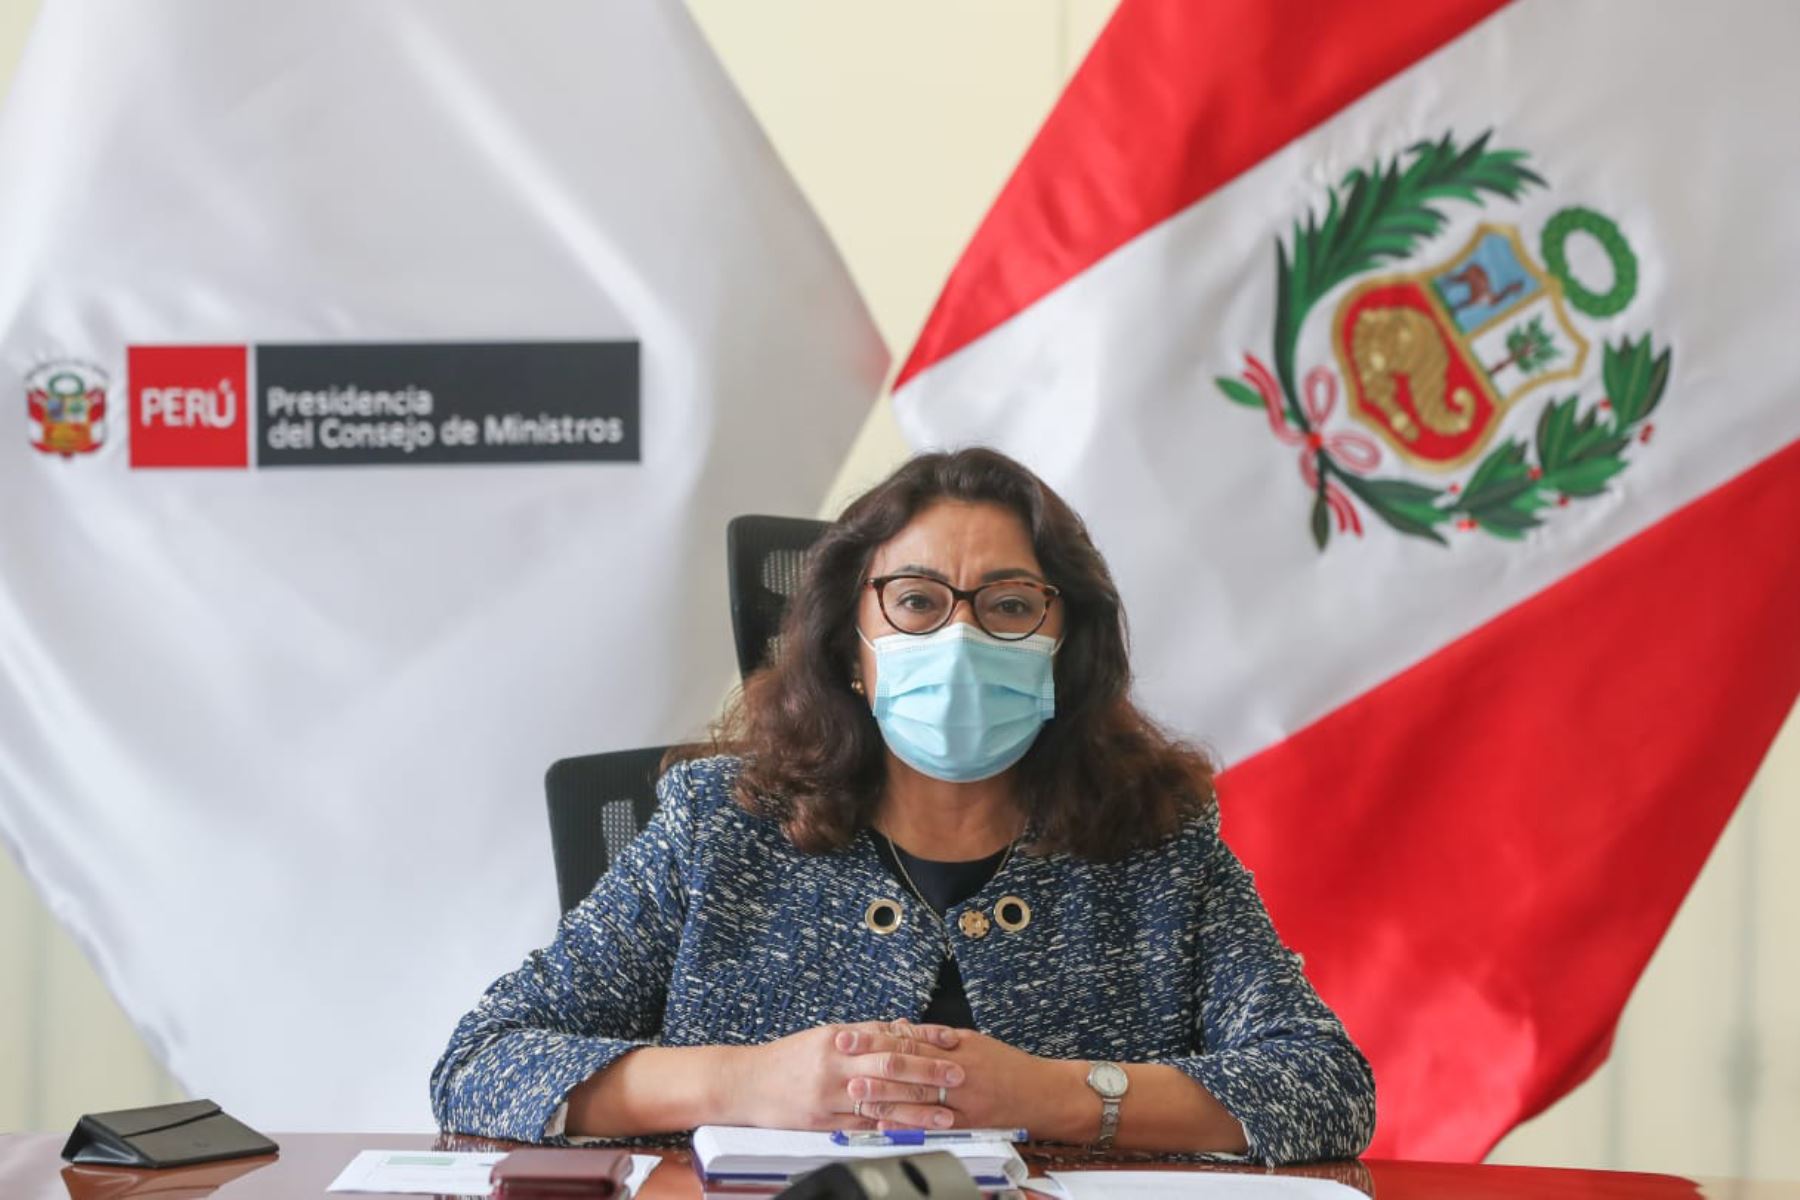 Prime Minister Violeta Bermudez. Photo: Presidency of the Council of Ministers of Peru